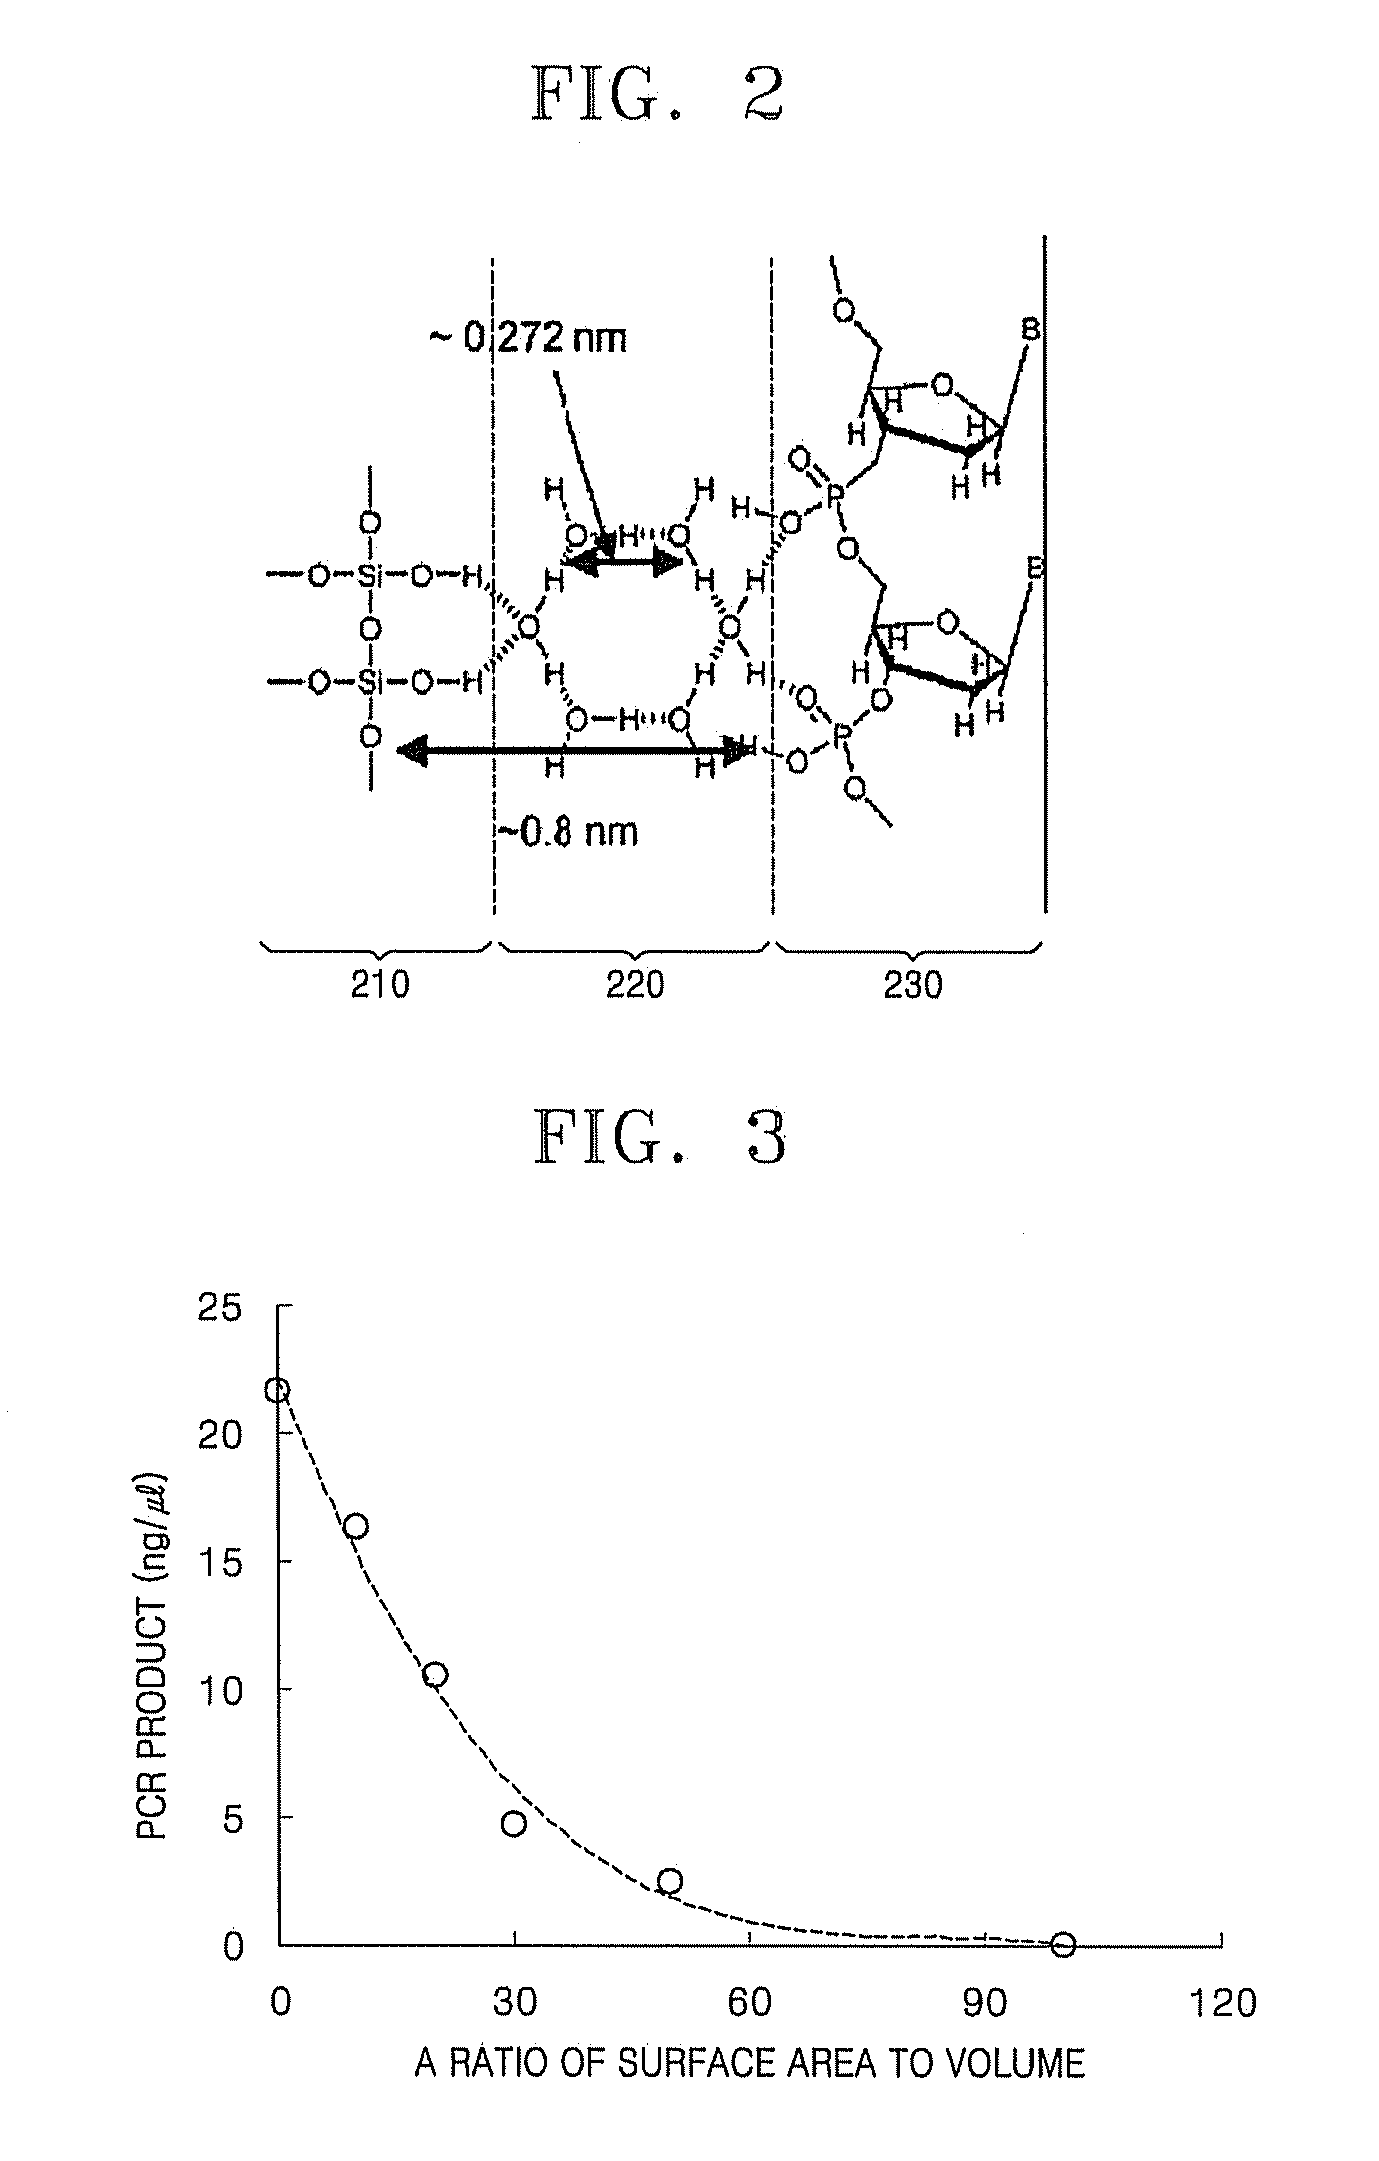 Method and apparatus for concentrating and amplifying nucleic acid in single micro chamber